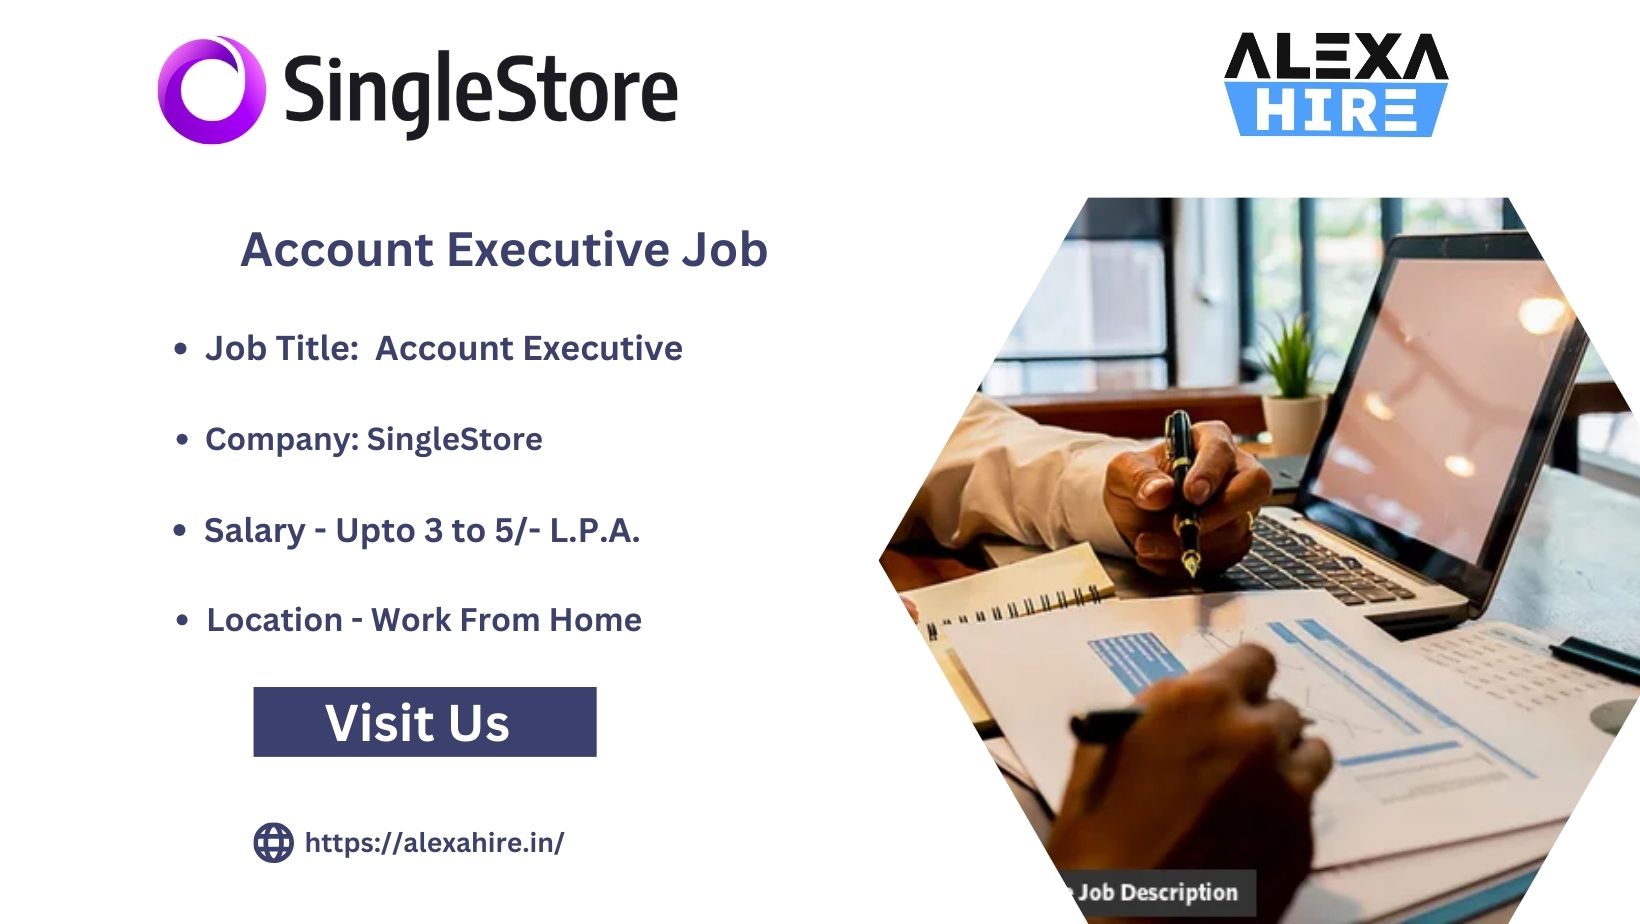 SingleStore is Hiring Account Executive Job| Apply Right Now